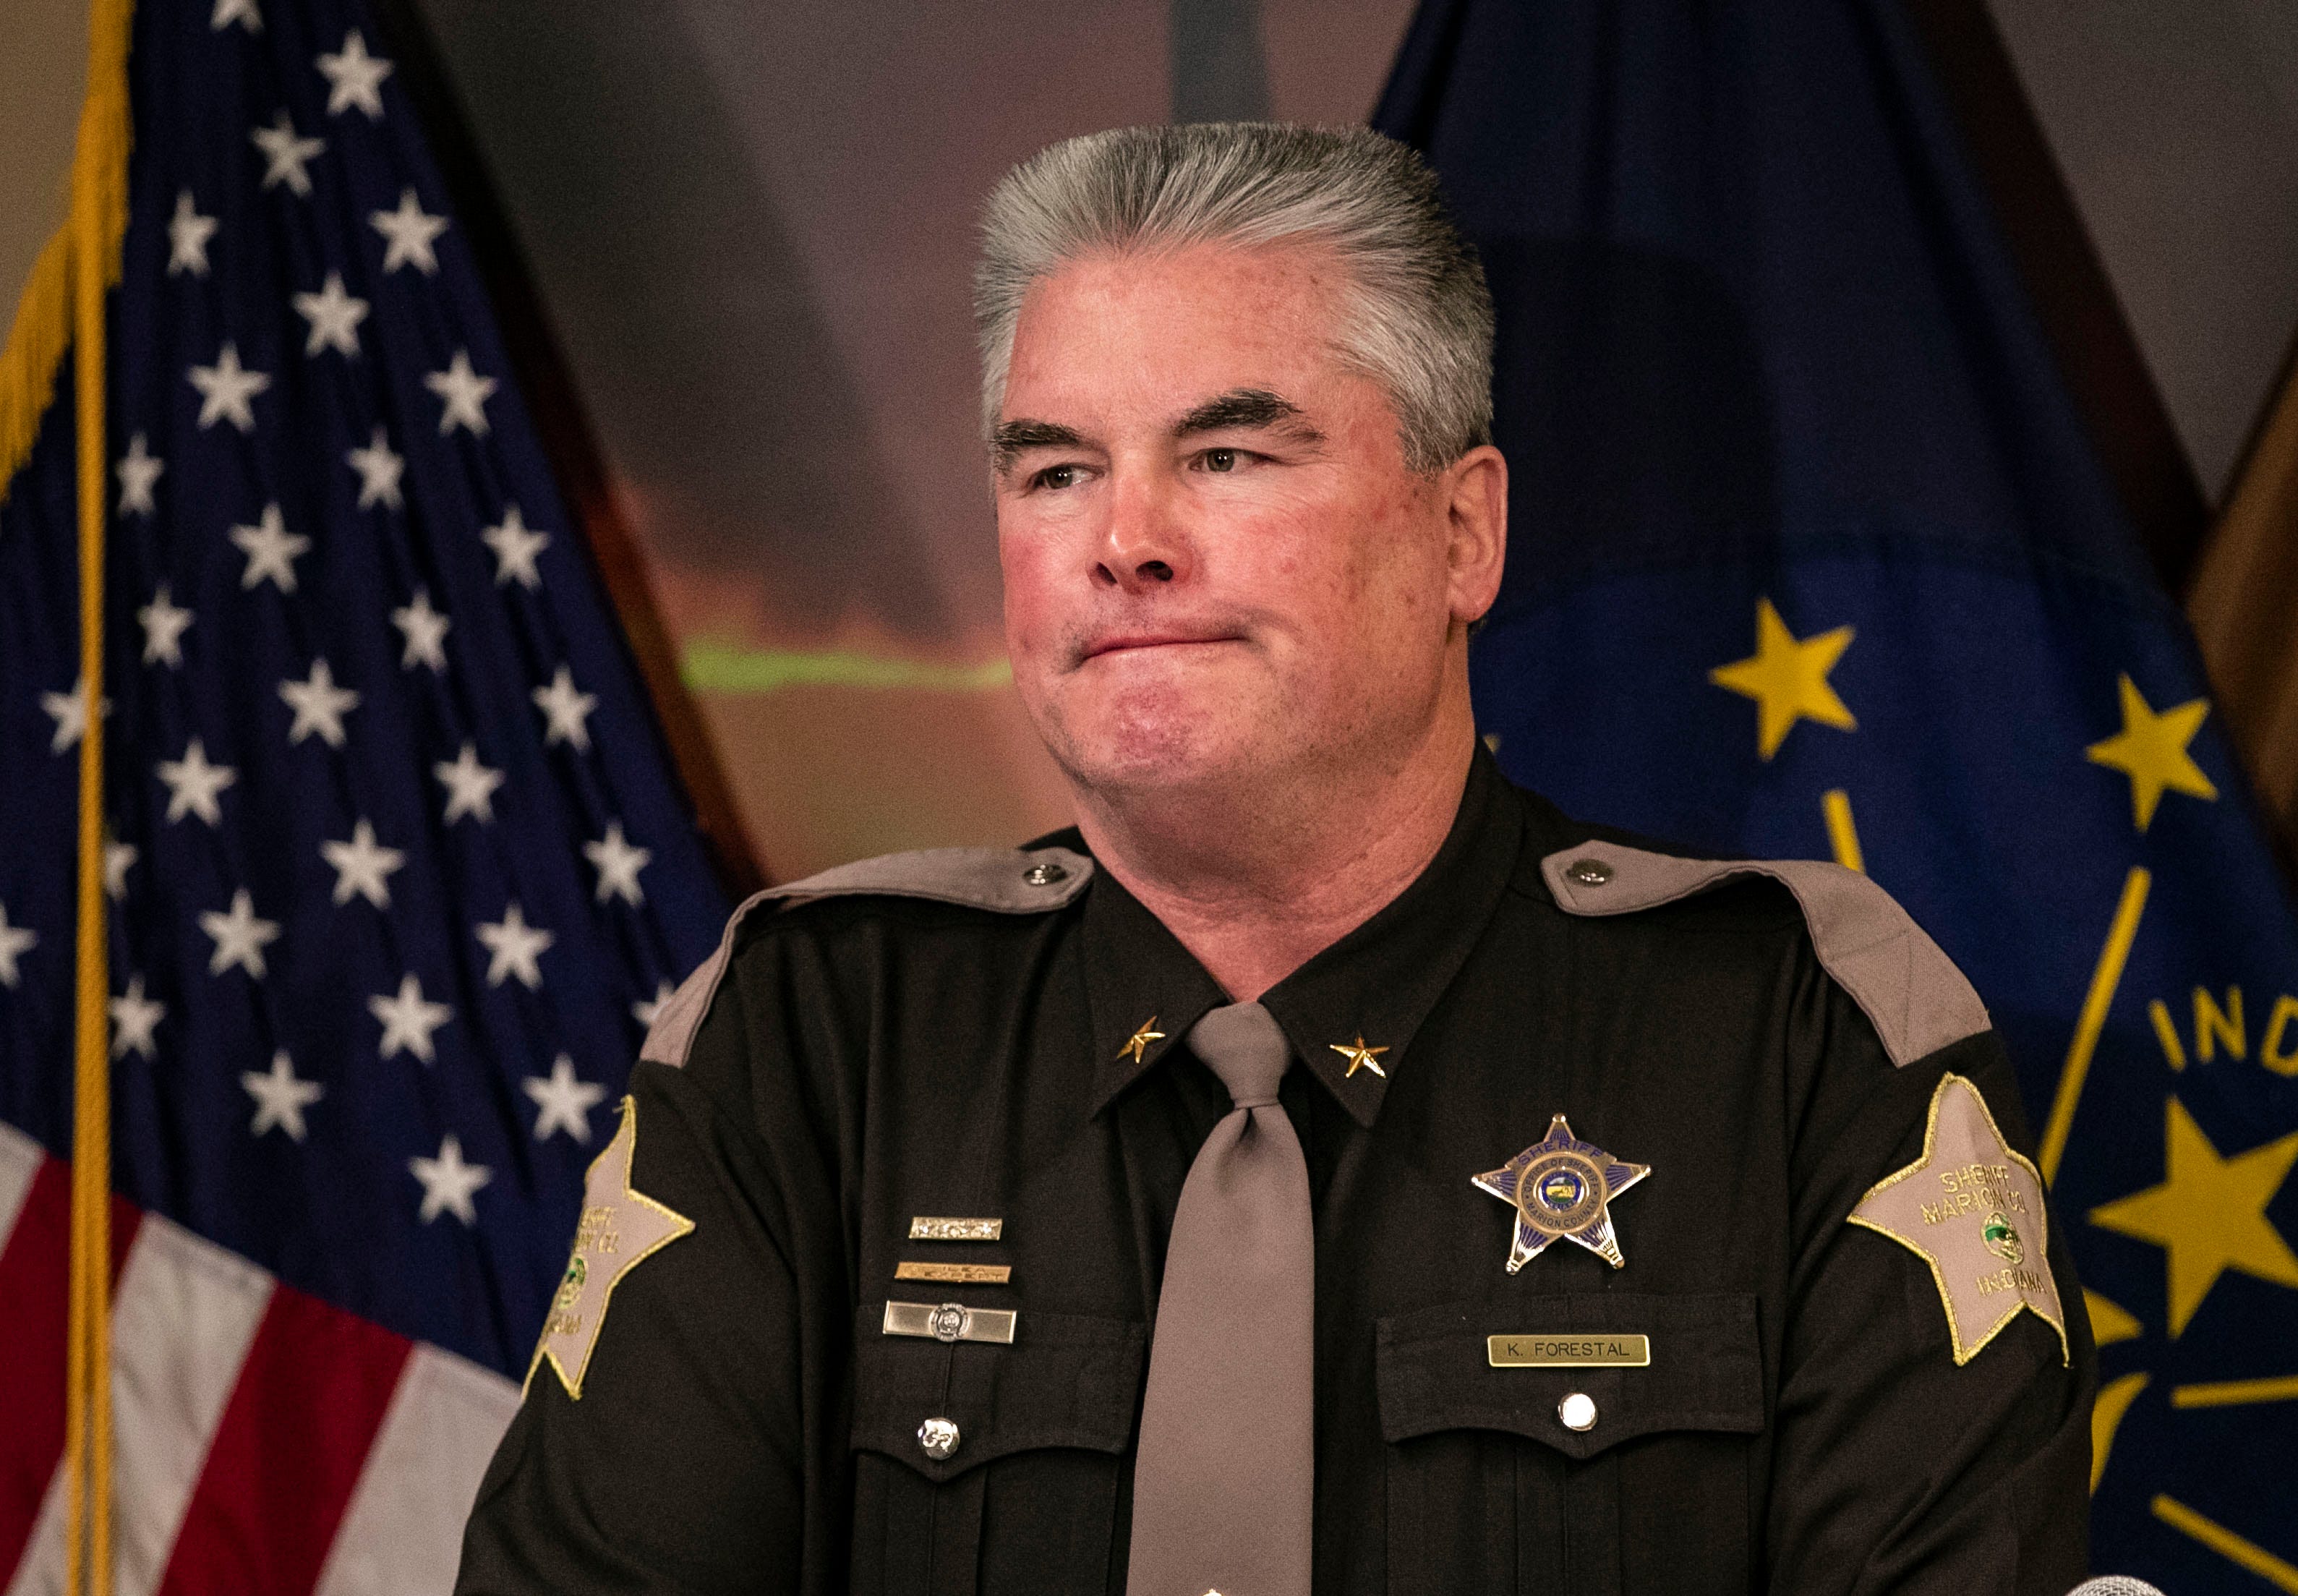 Marion County Sheriff Kerry Forestal said his jail is now the state's largest provider of care for people with mental health or substance use issues.